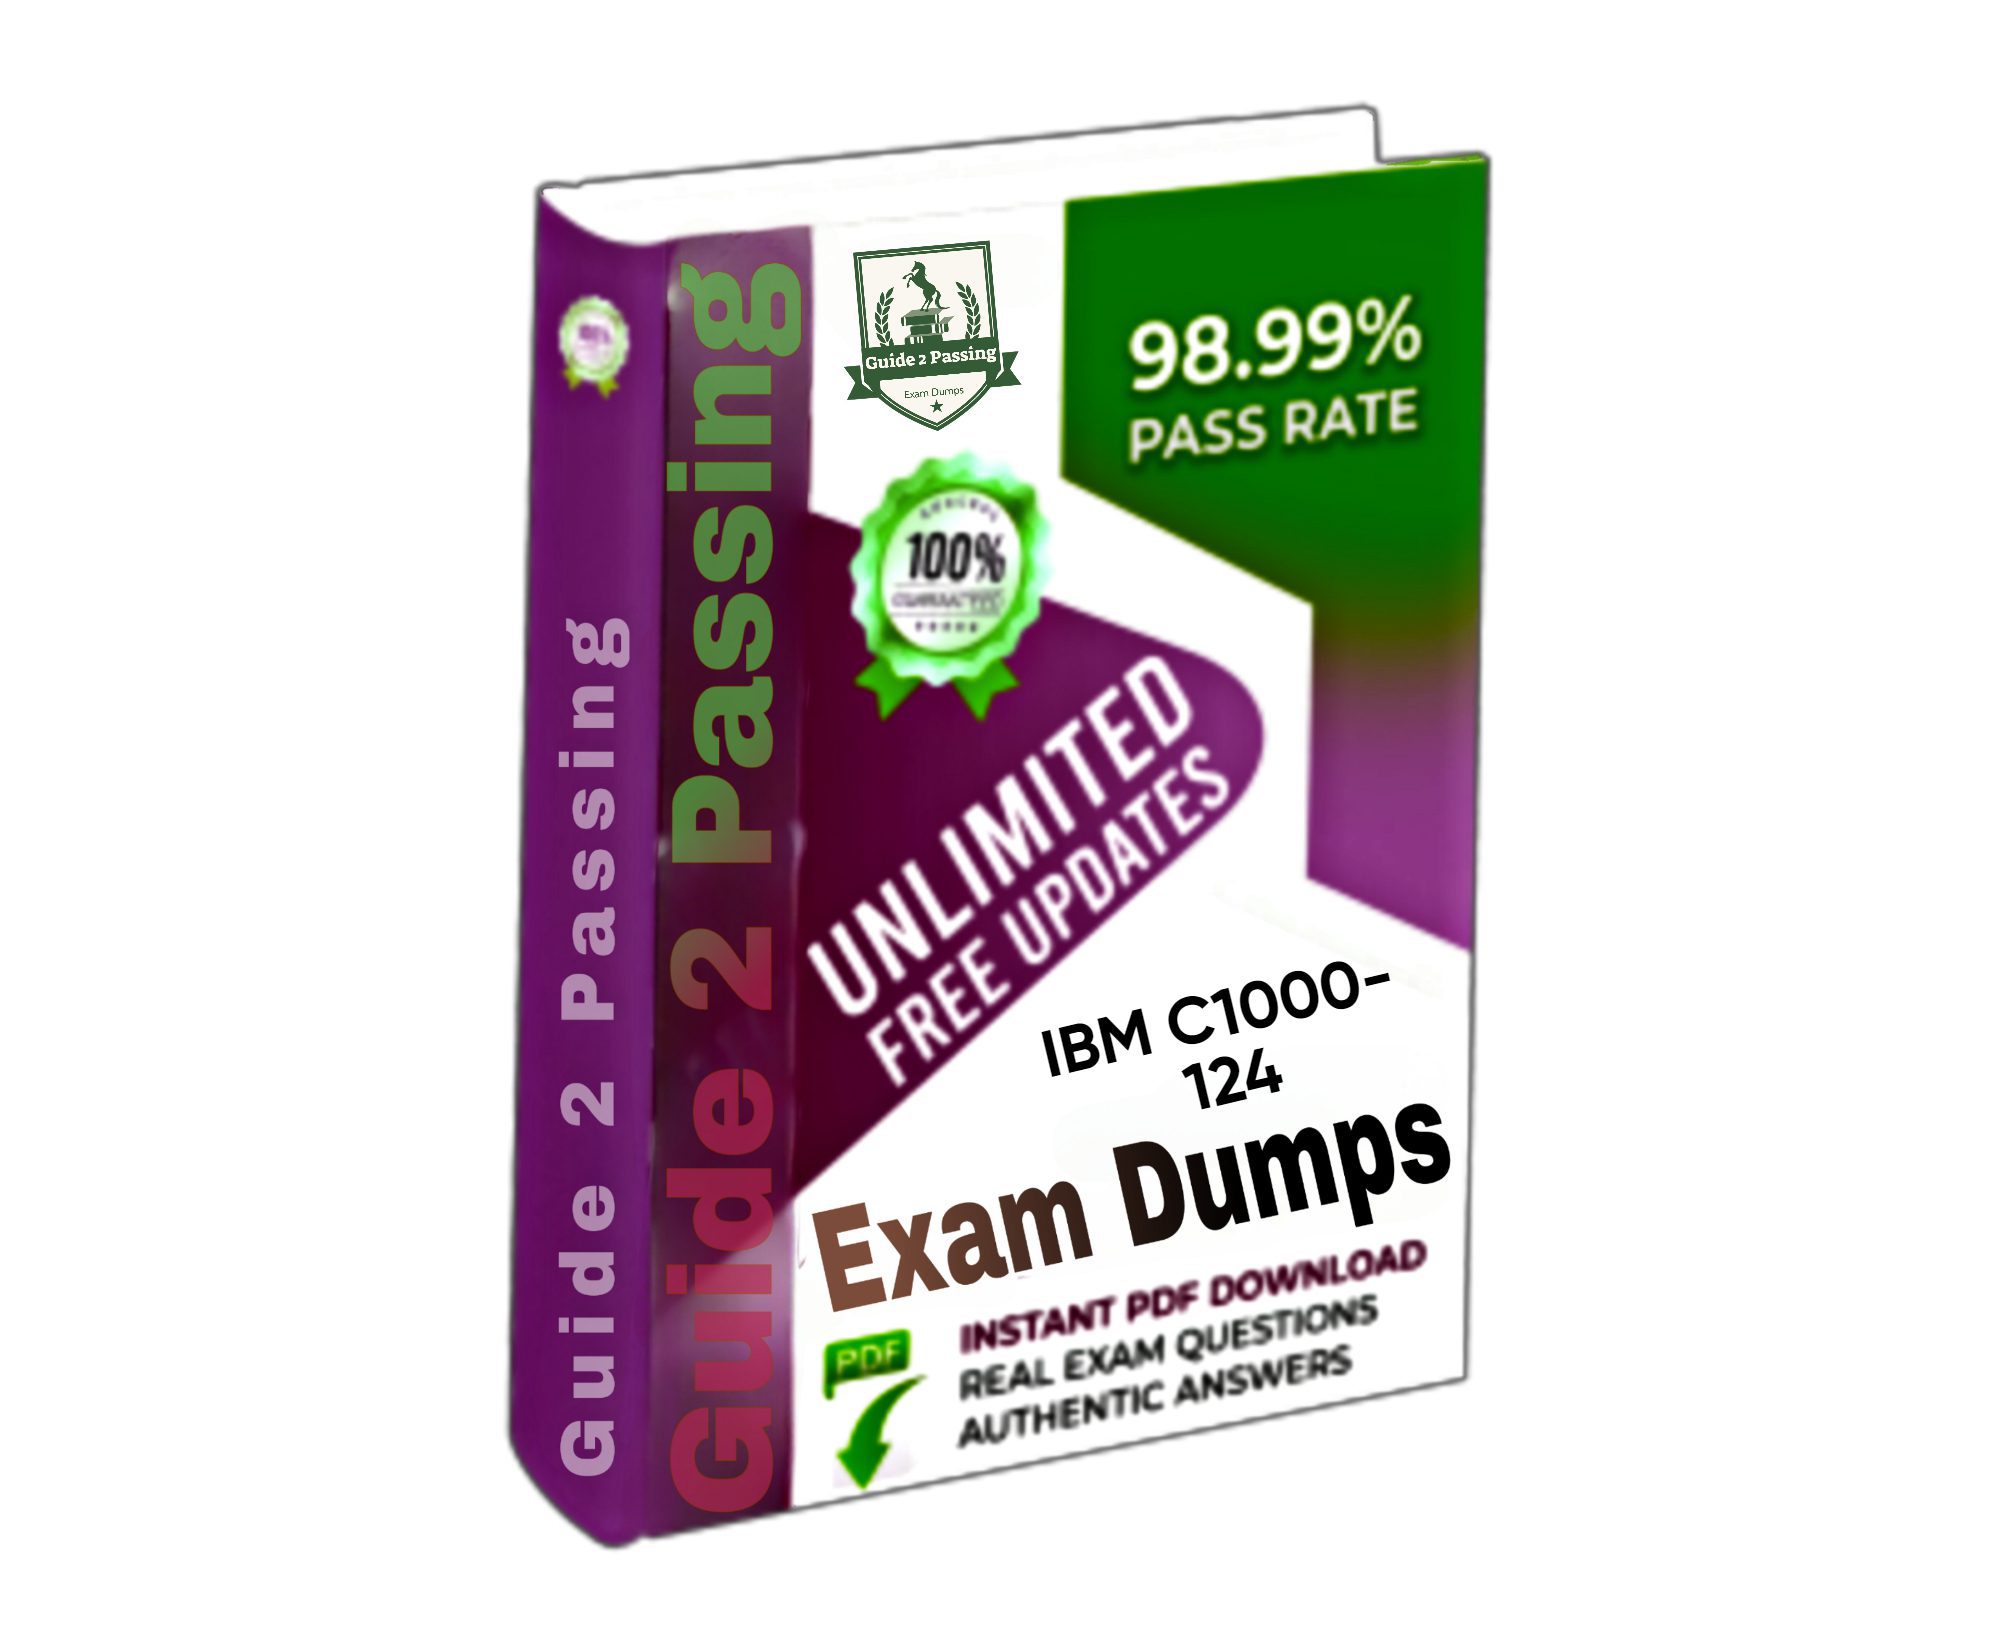 Pass Your IBM C1000-124 Exam Dumps From Guide 2 Passing